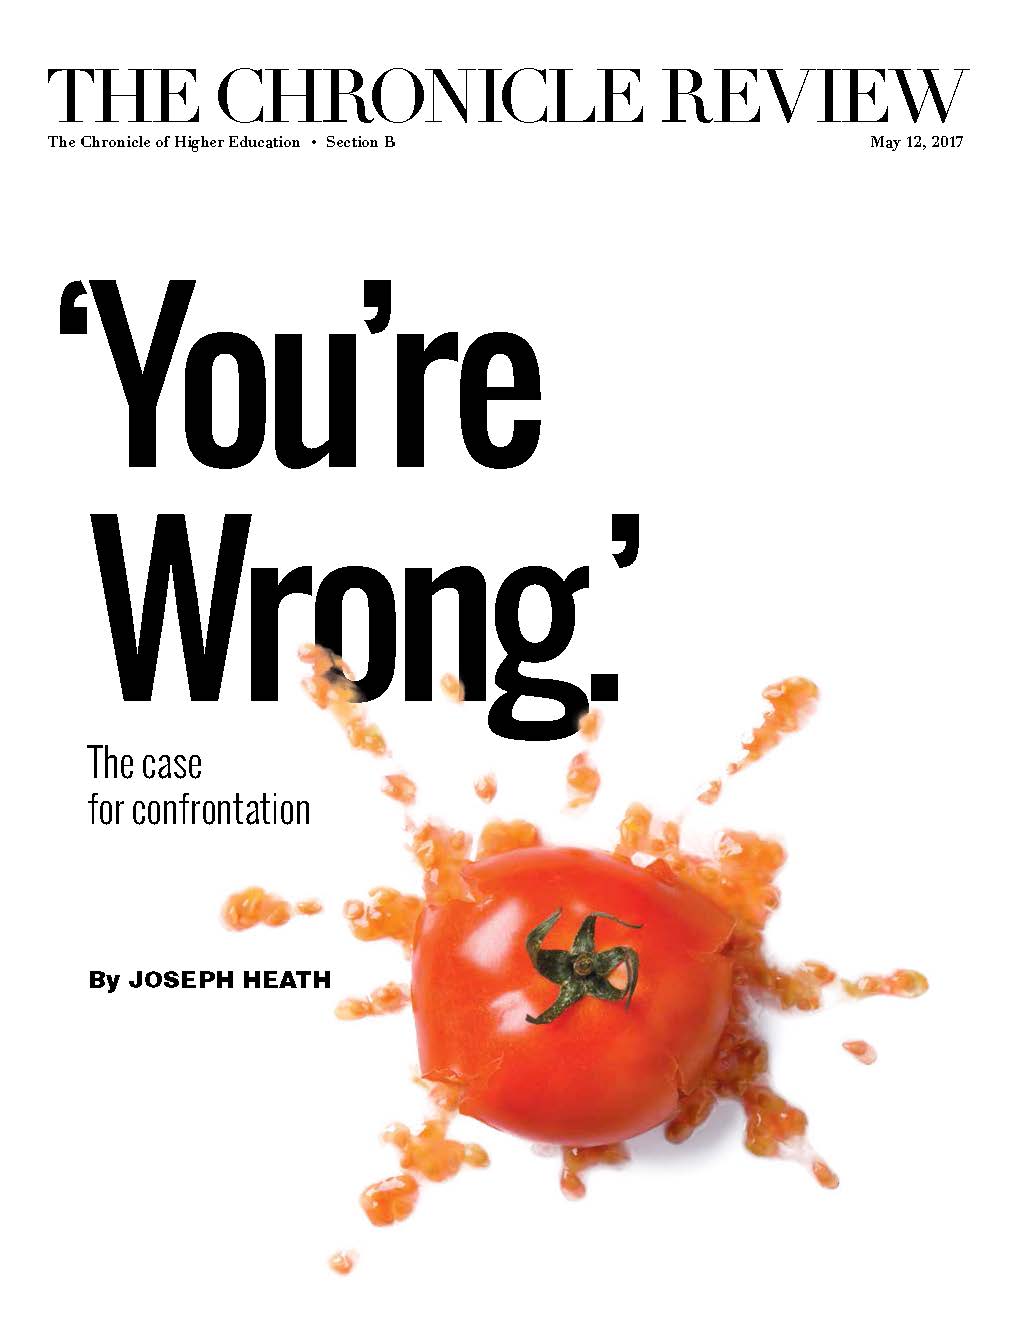 The Chronicle Review - “You’re Wrong,” May 12, 2017